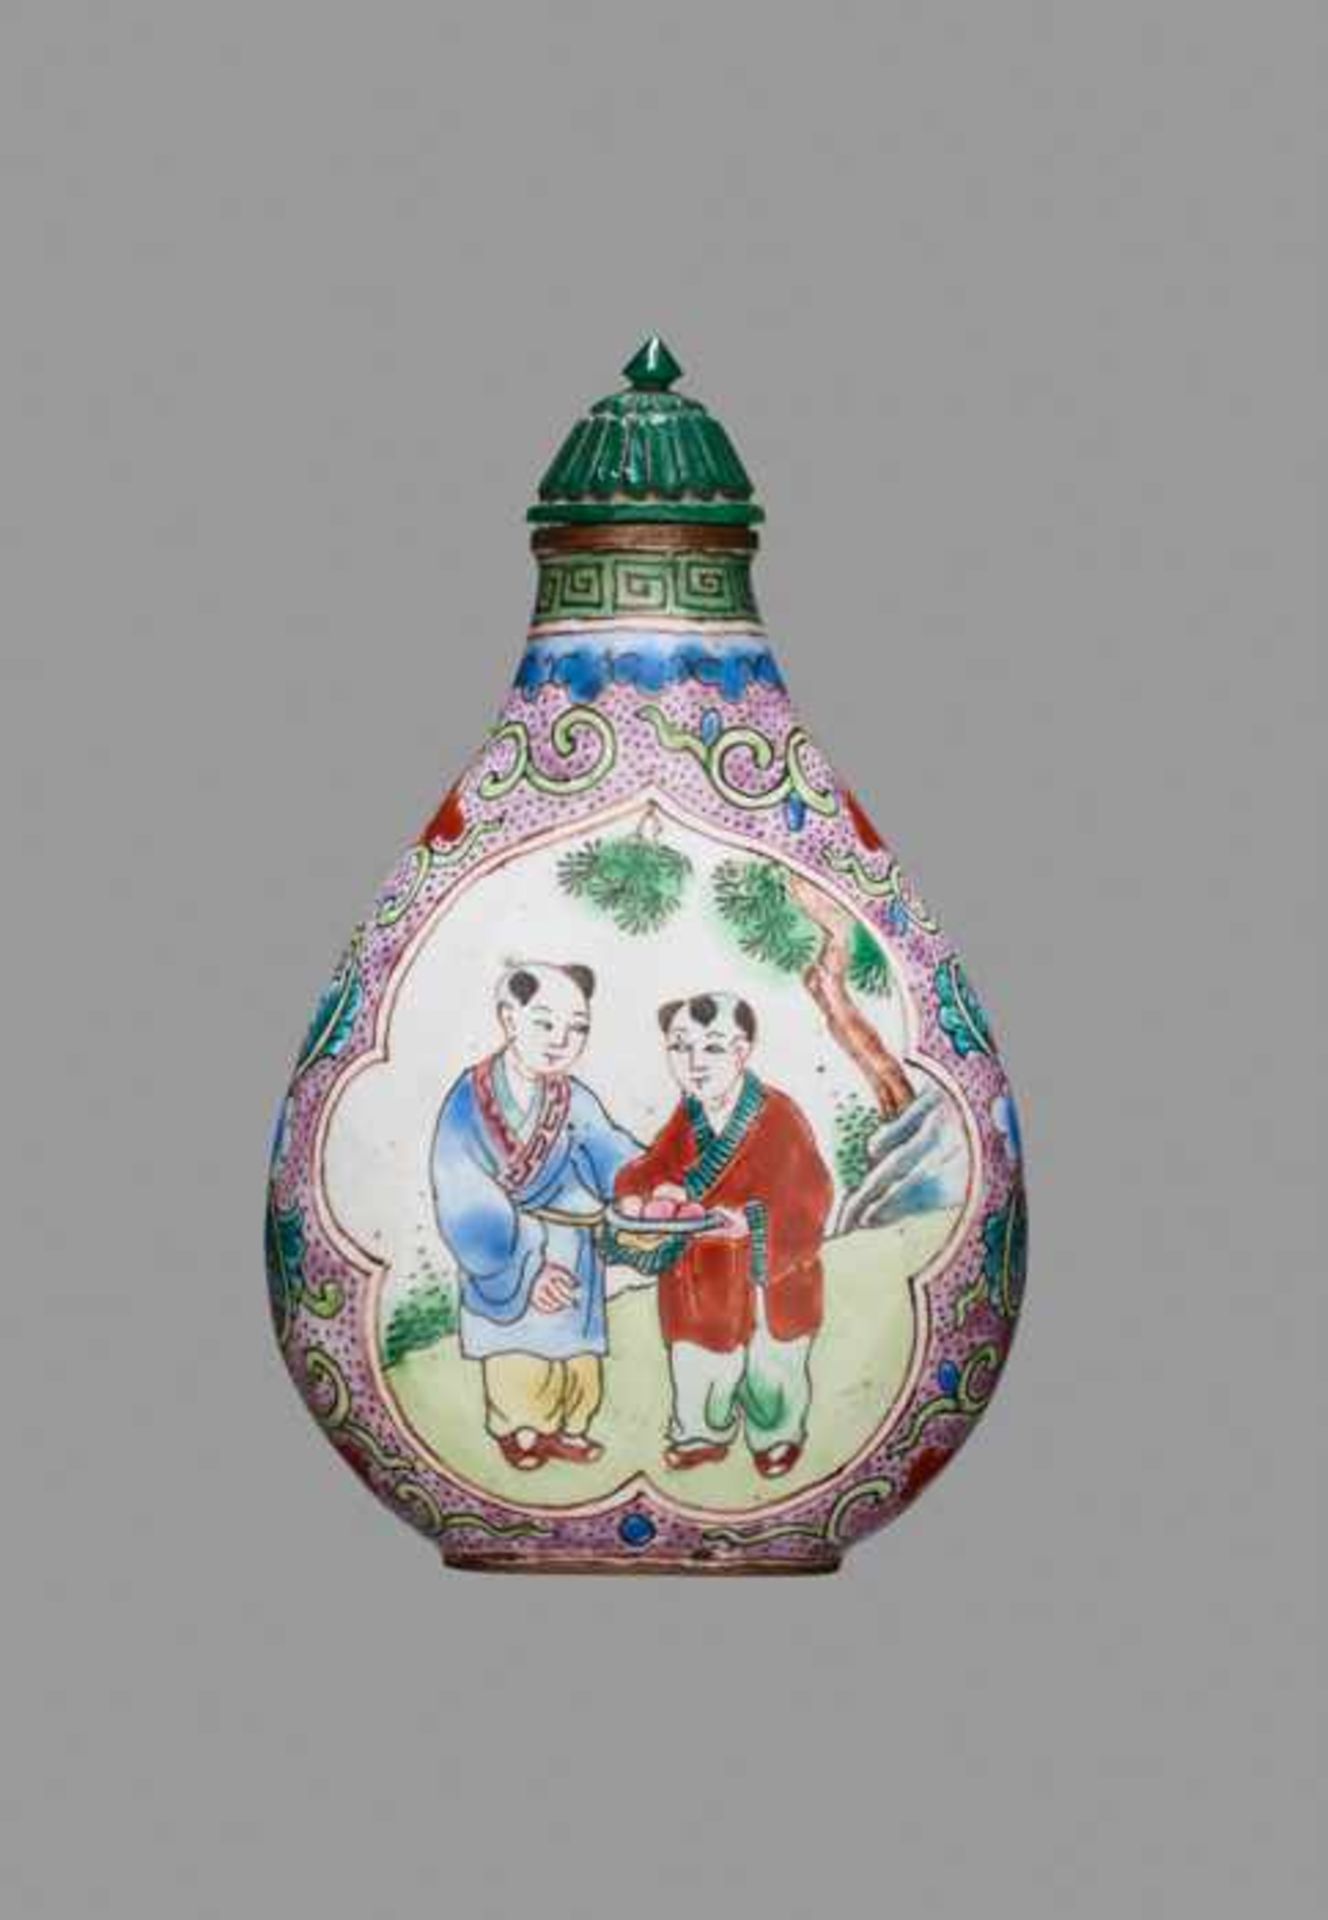 AN ENAMELED COPPER SNUFF BOTTLE, GUANGZHOU, 1850-1930 Copper with painted enamels. China, 1850-1930A